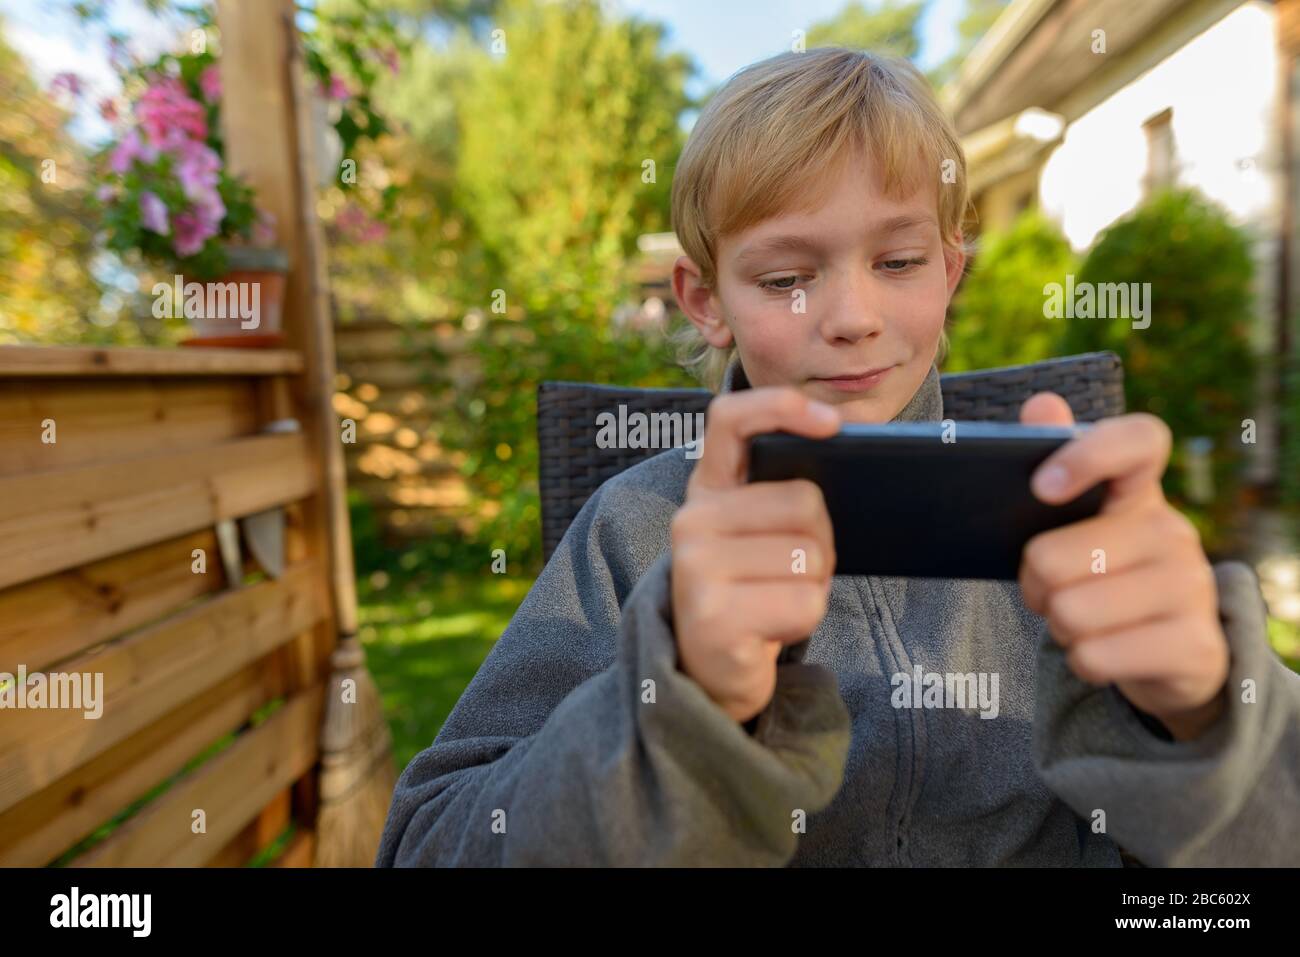 Young handsome boy using phone in the backyard Stock Photo